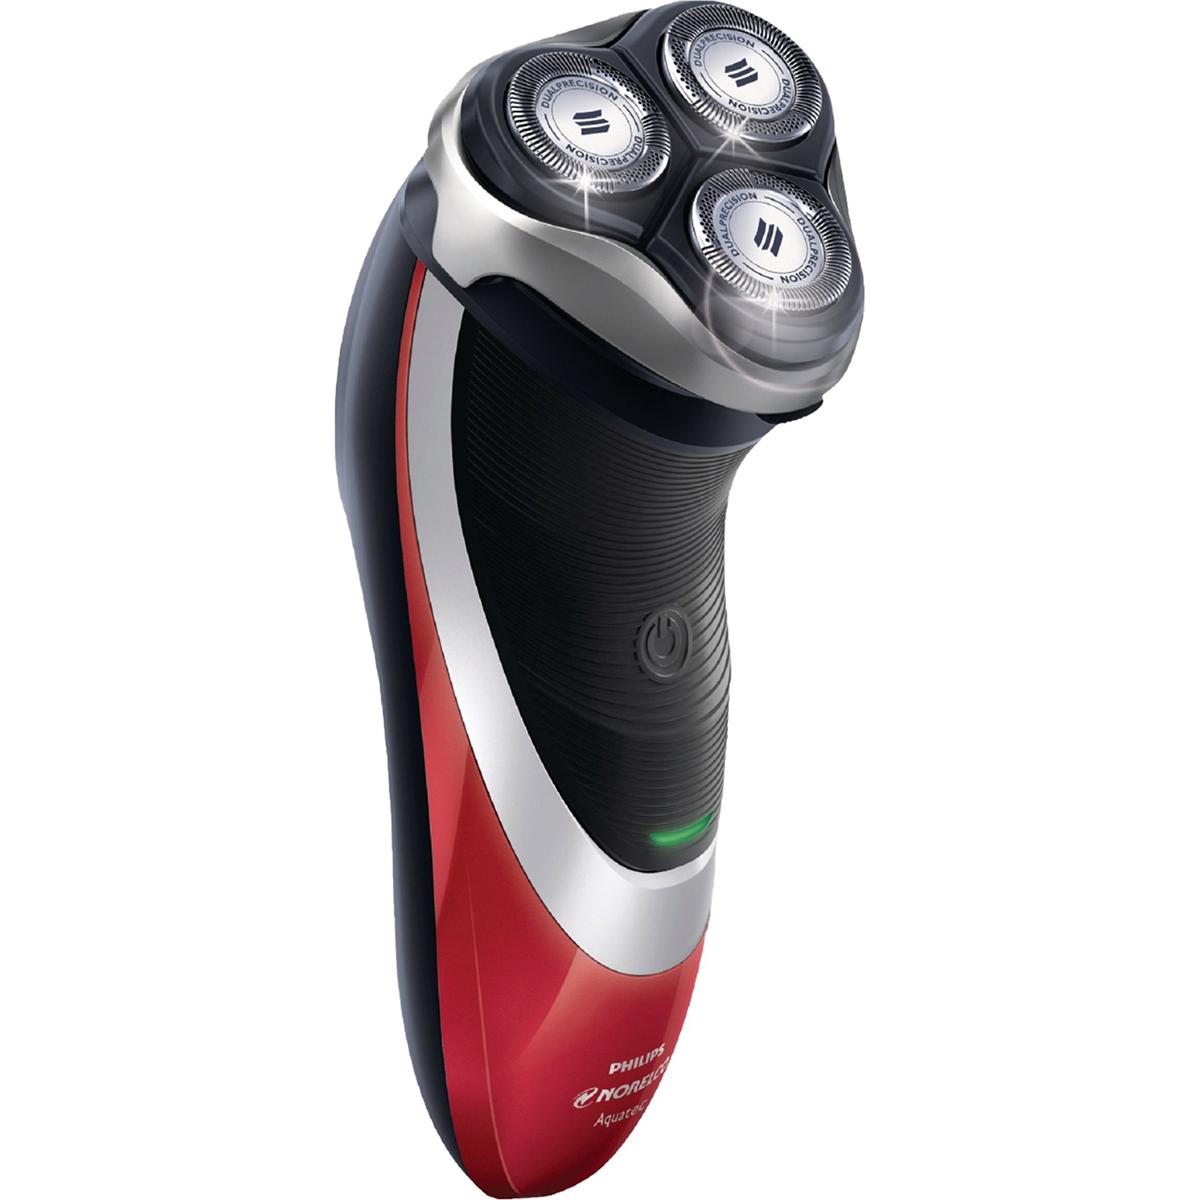 Philips Norelco Rechargeable Wet Dry Electric Shaver for $24.99